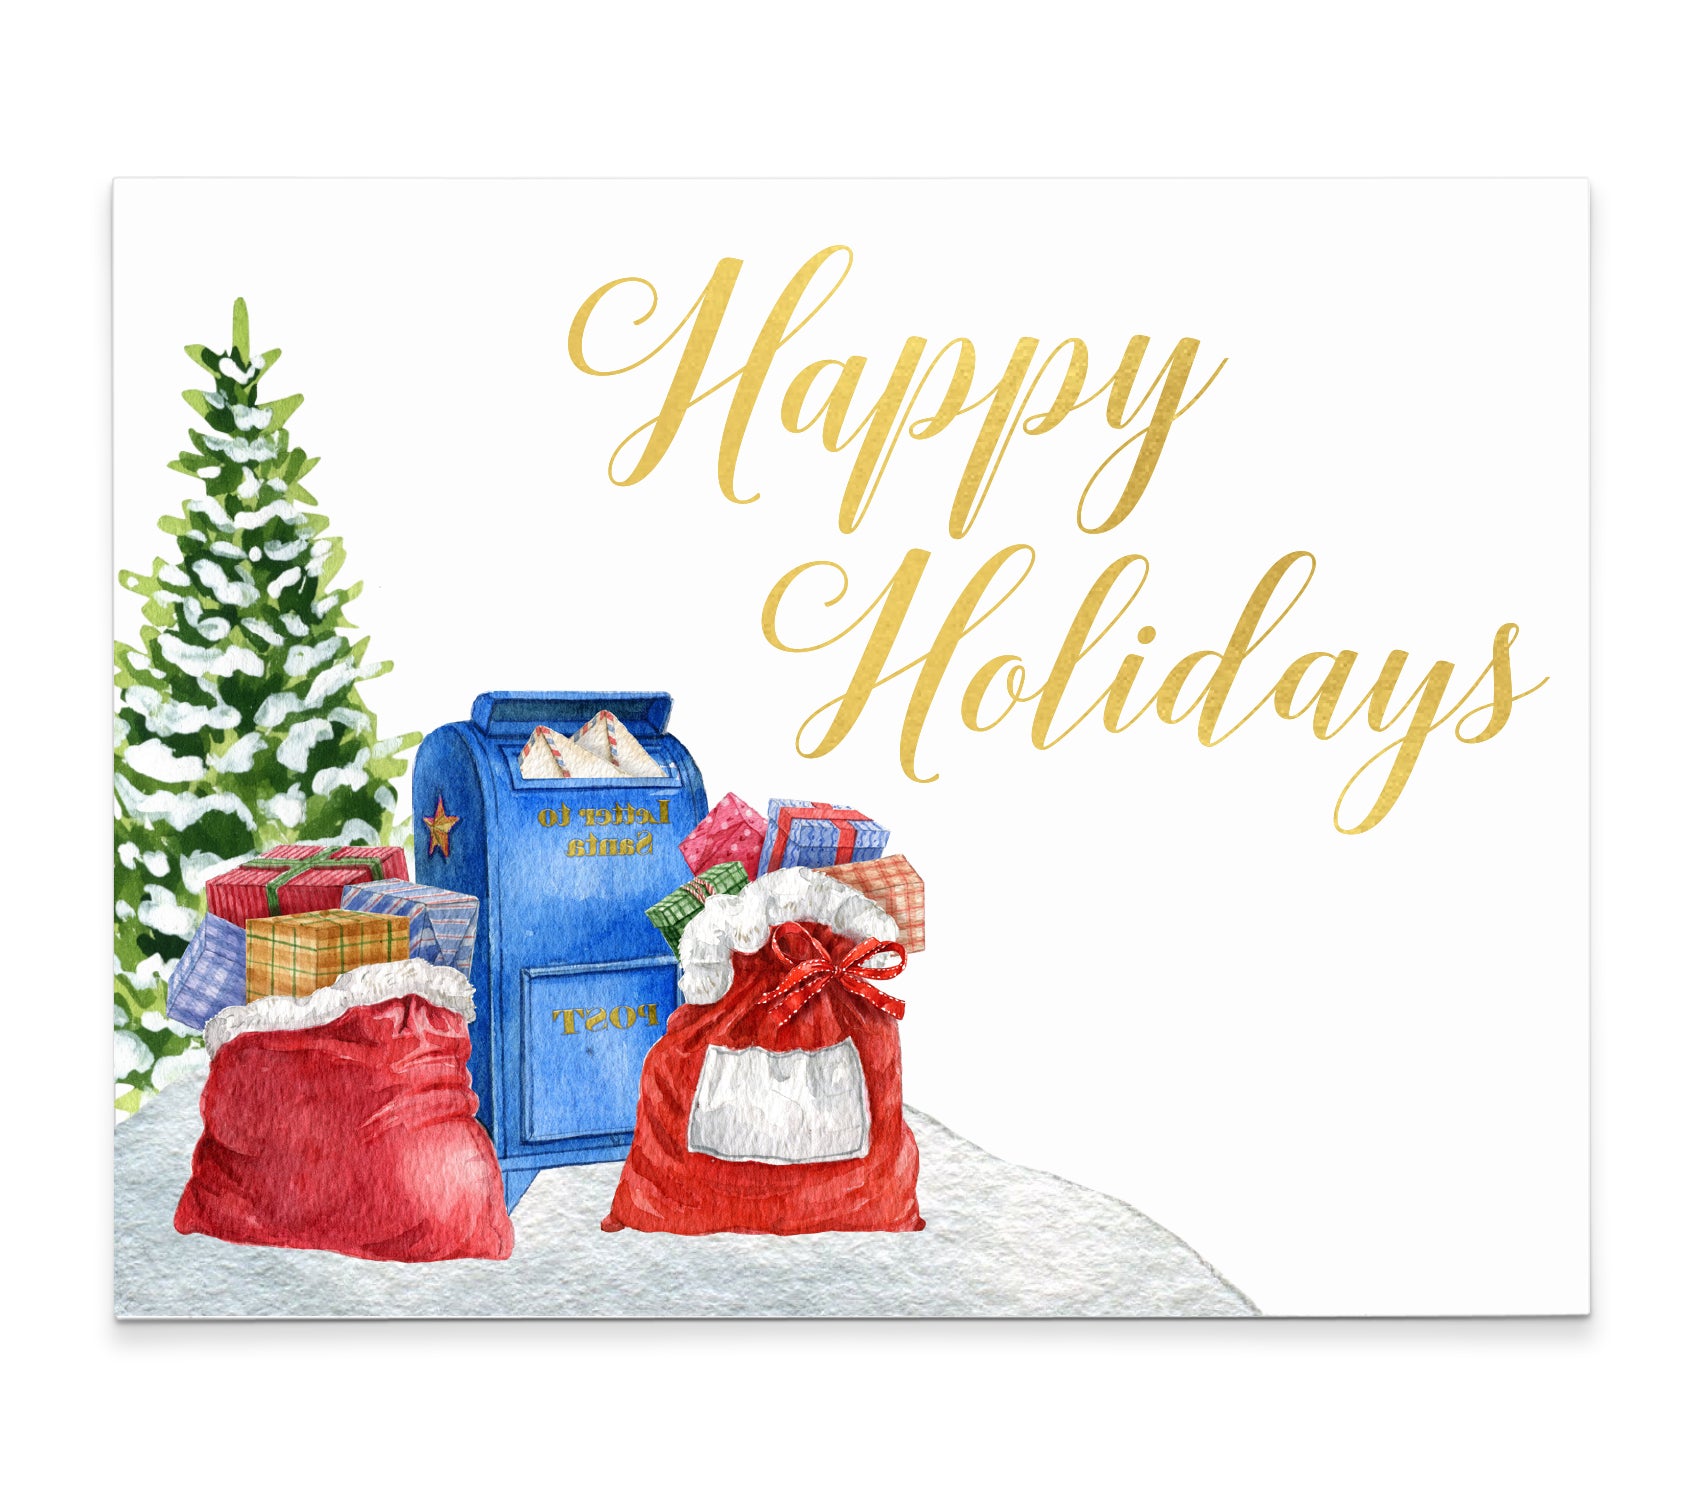    HGC011 Happy Holiday Postcards for Mail Carrier with Holiday Mail christmas tree drop box presents gifts usps